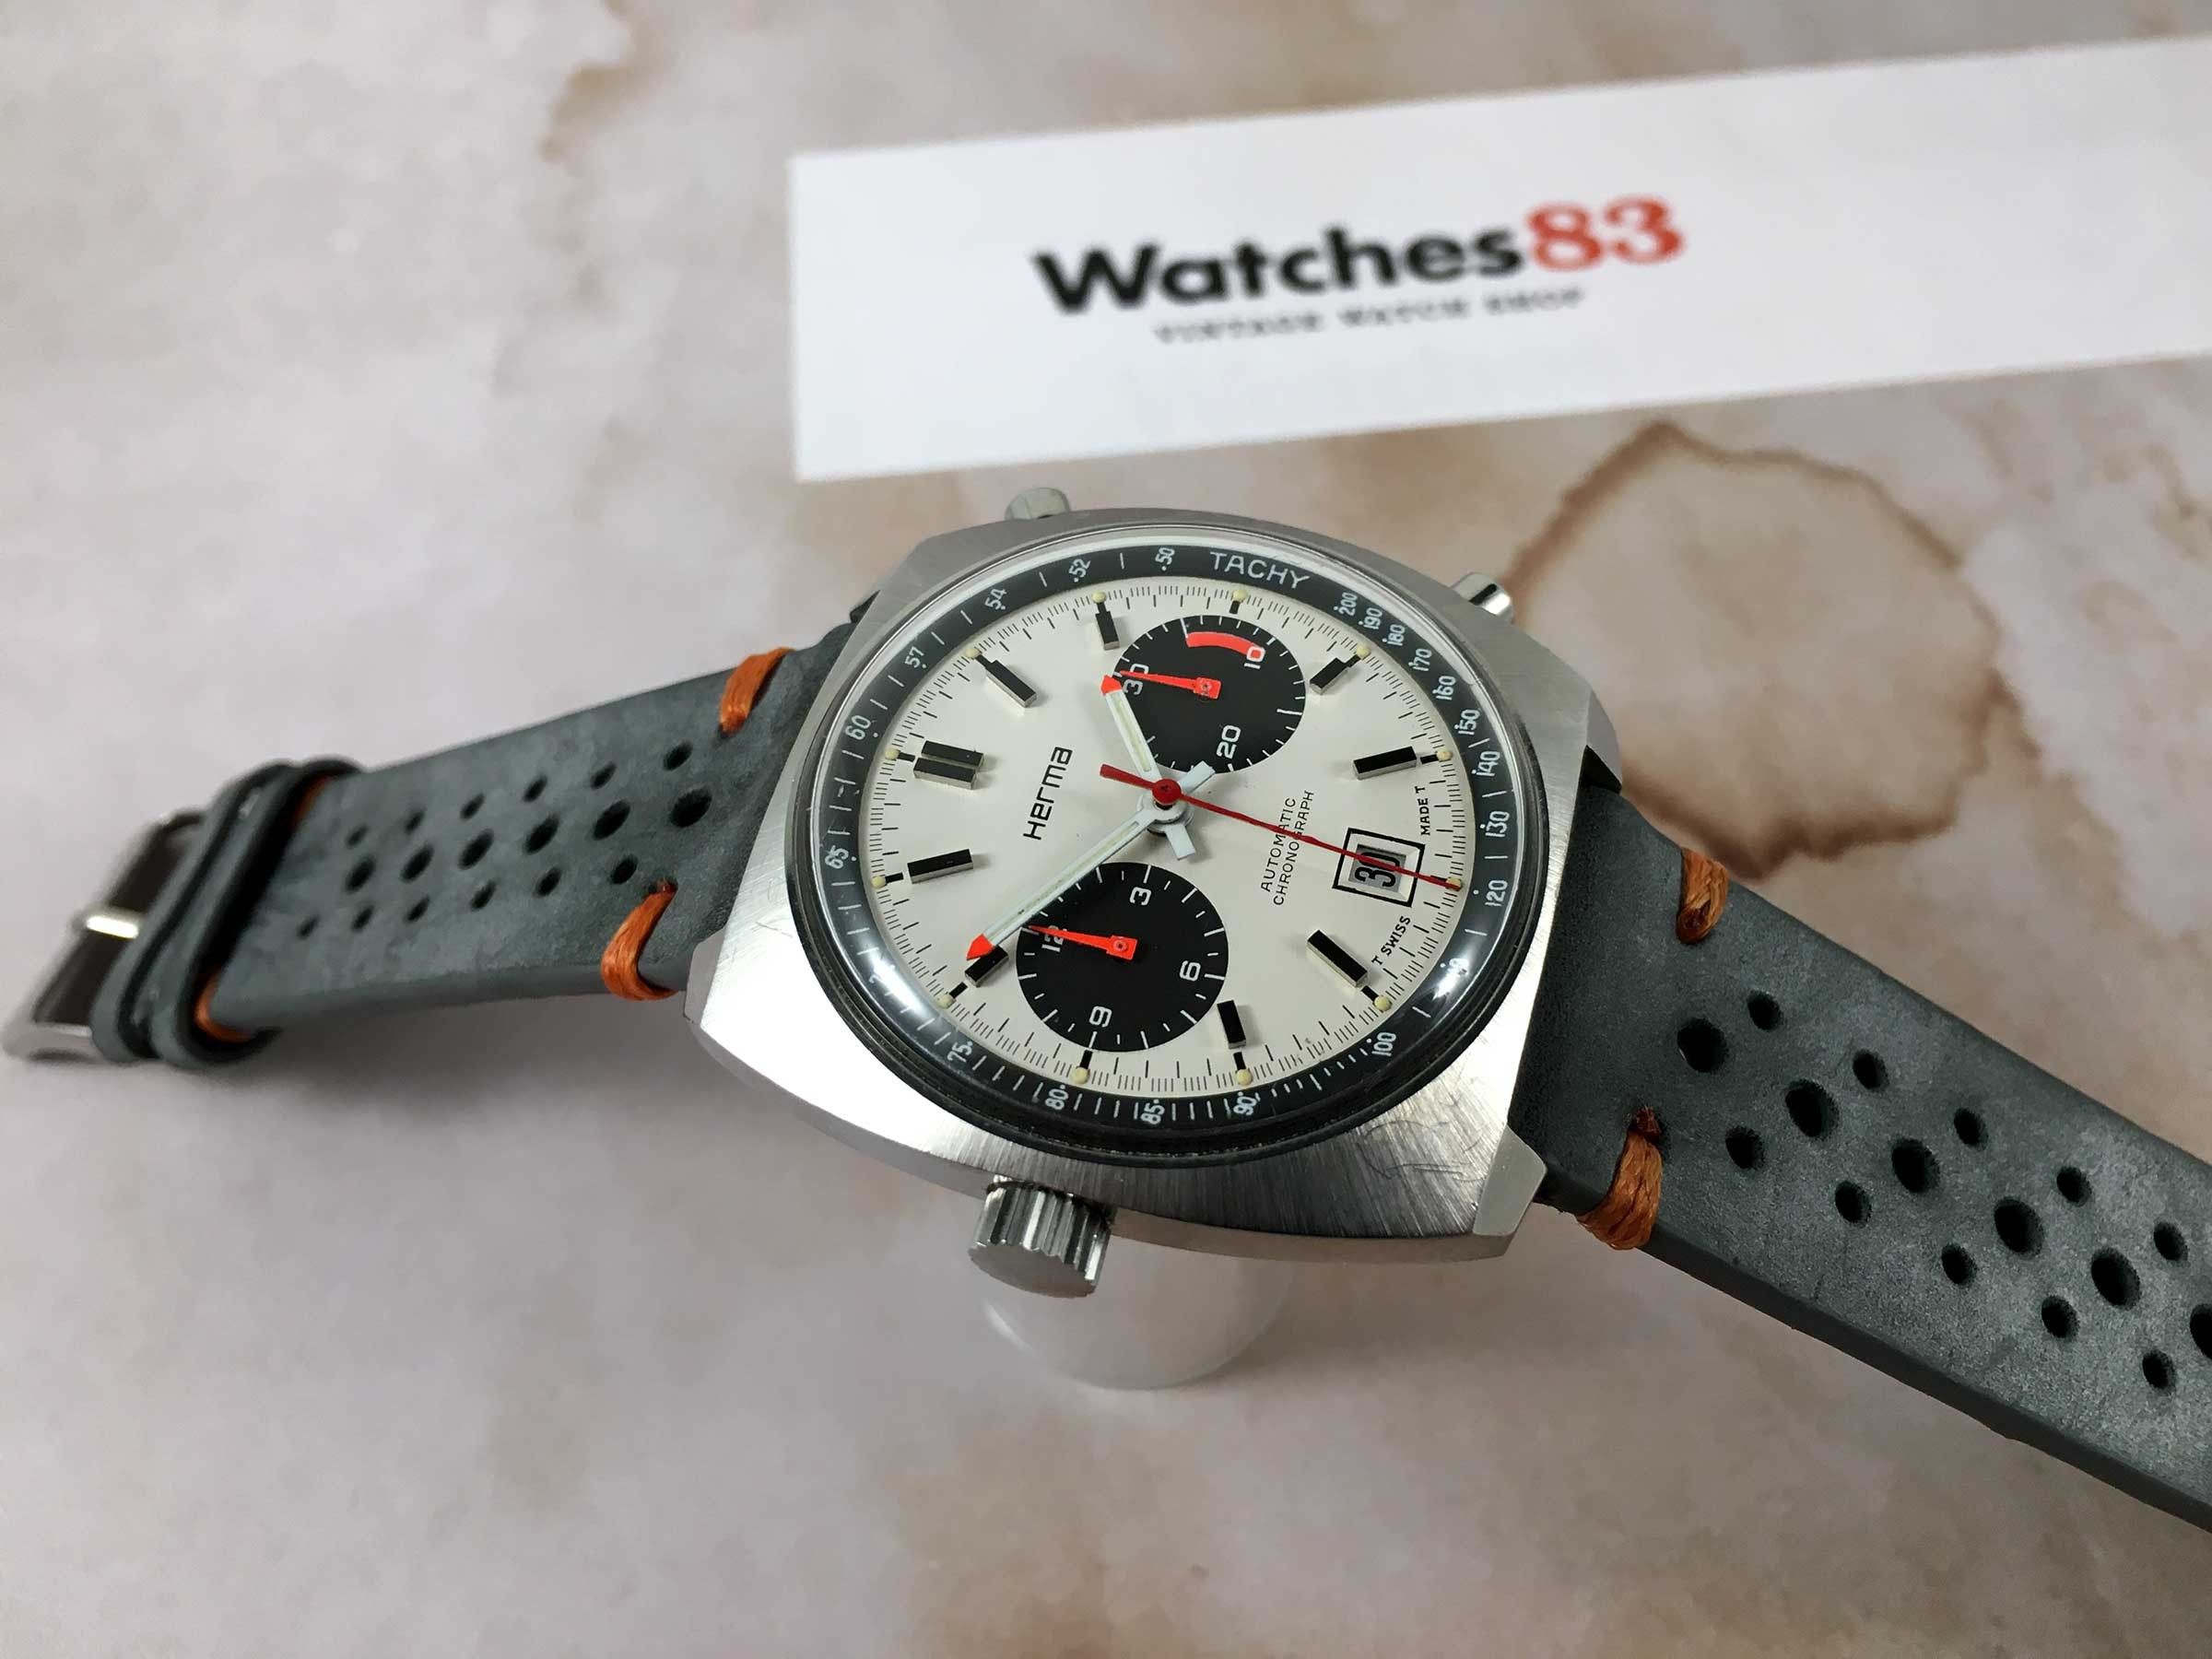 HERMA Vintage chronograph swiss automatic *** Herma Cal. watch JRGK Watches83 SPECTACULAR *** watches 12 Vintage 